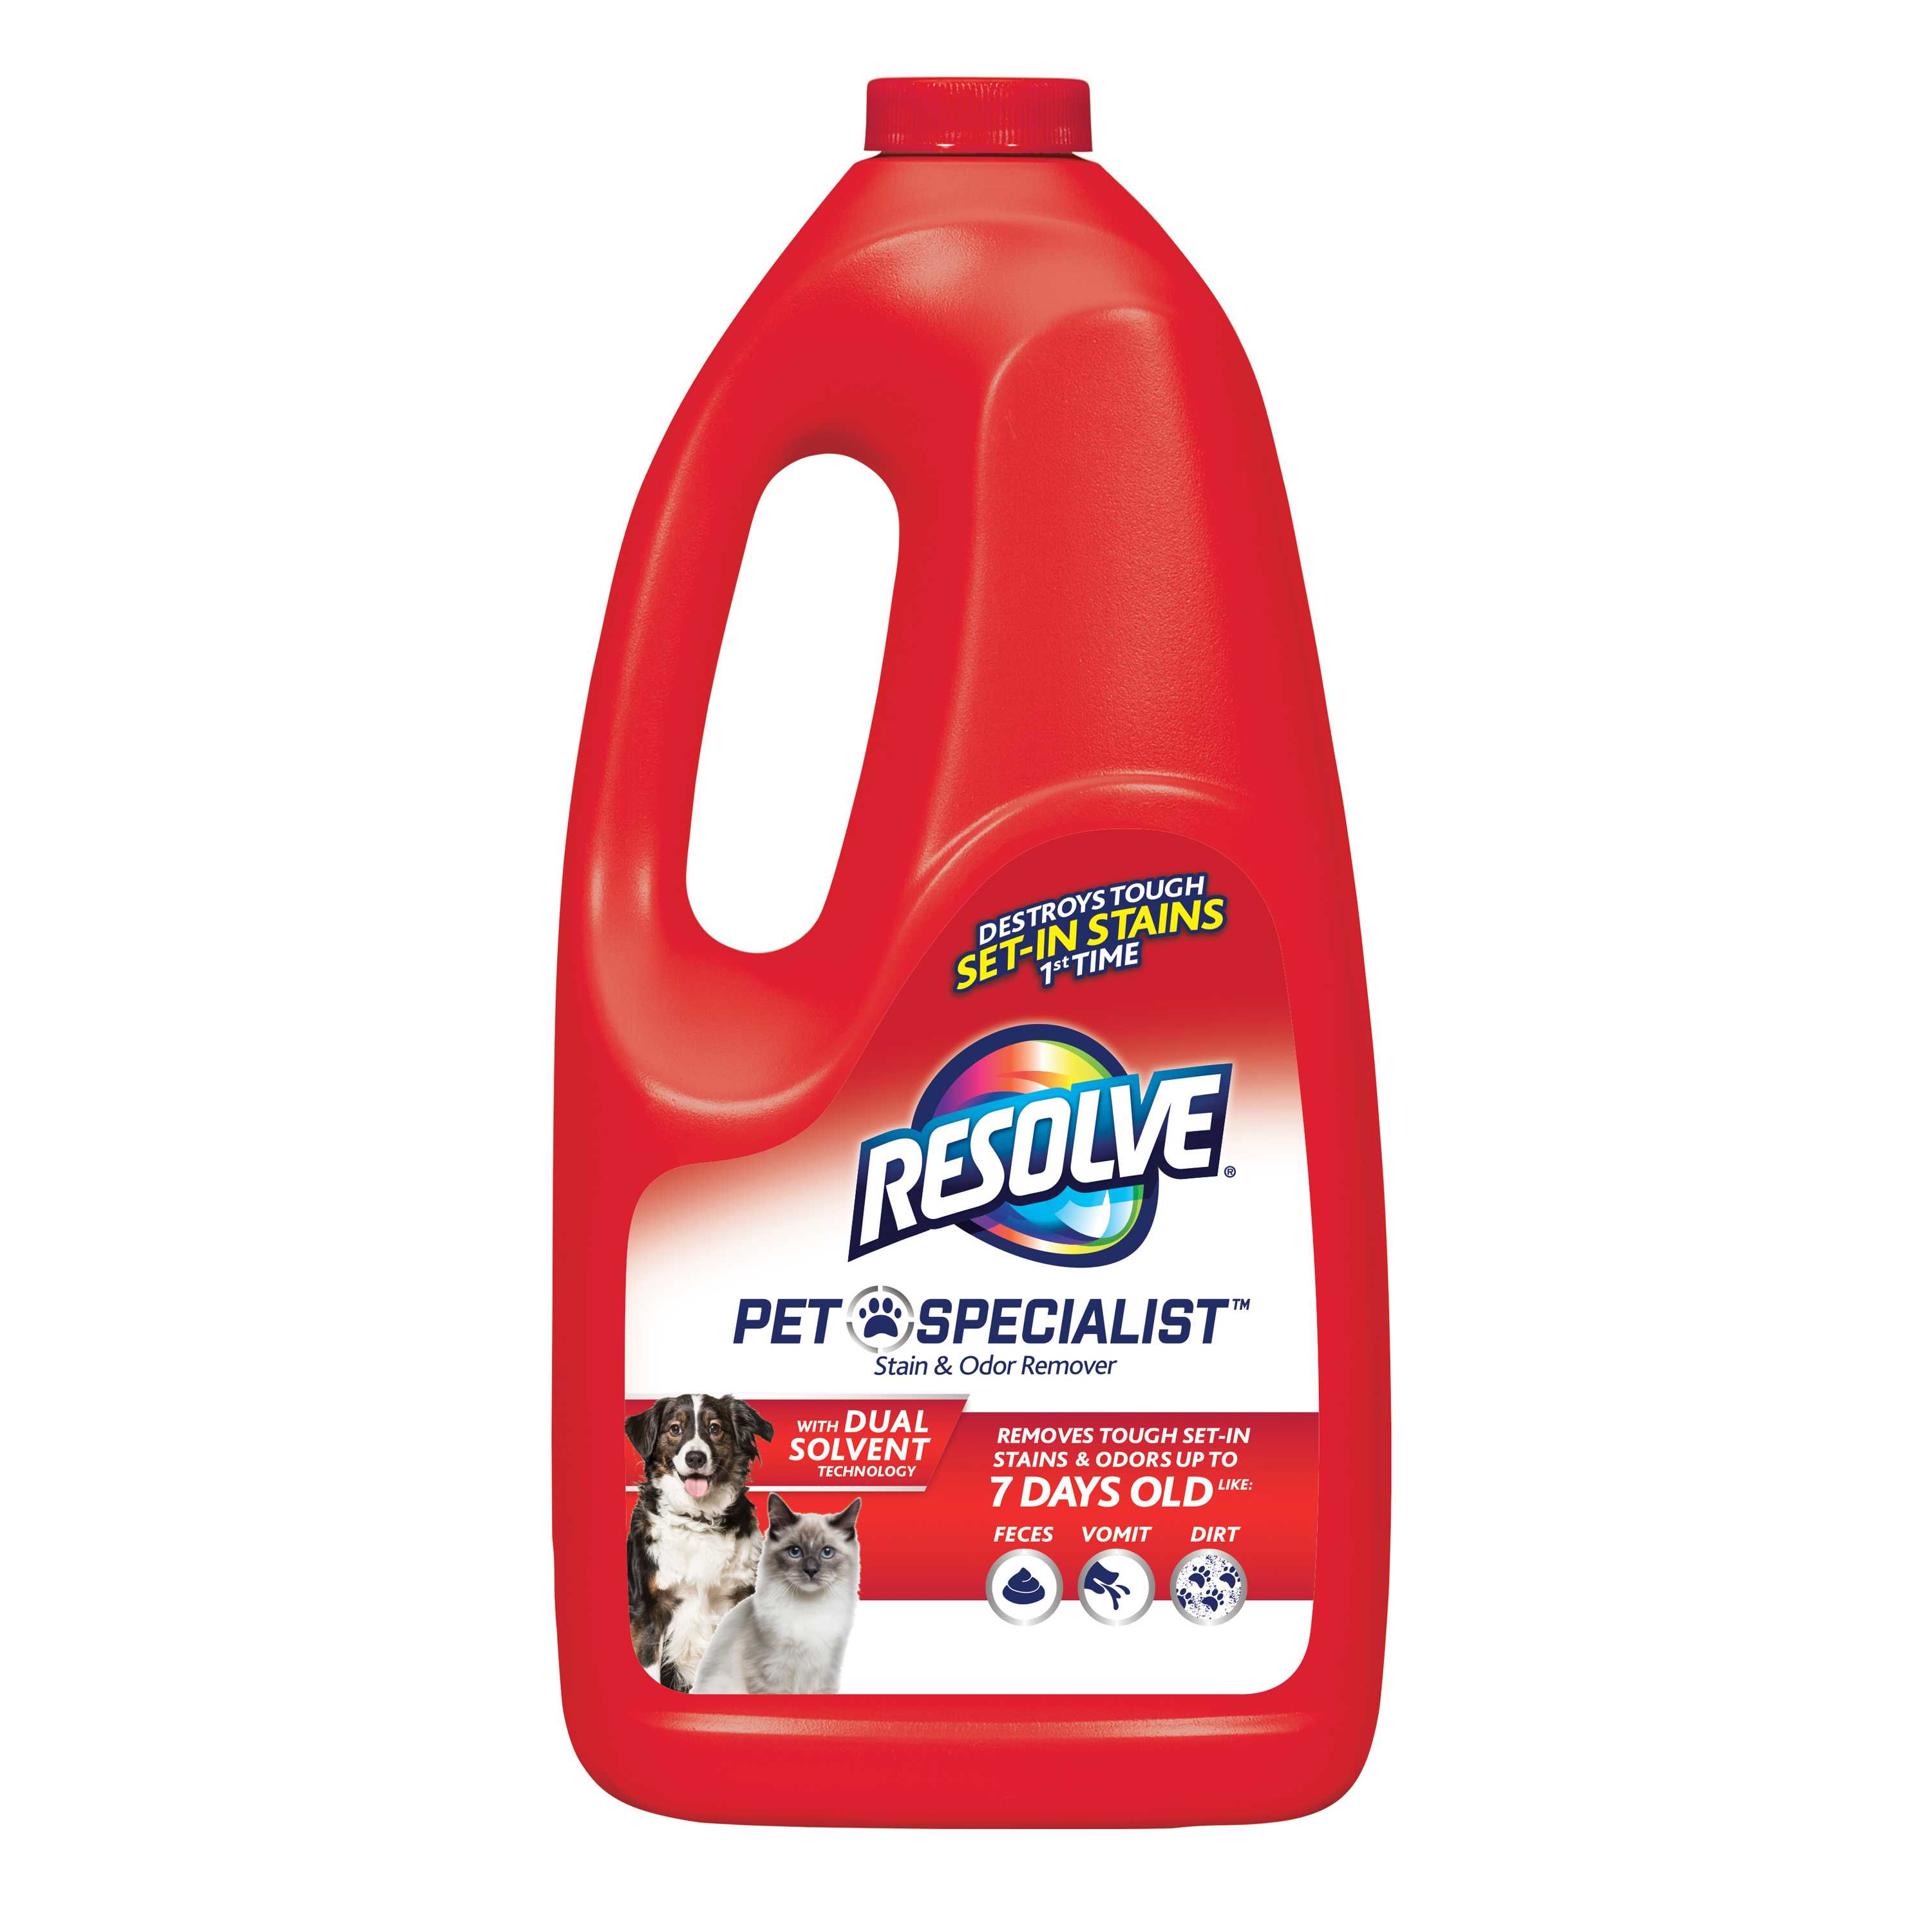 Resolve® Pet Specialist Stain & Odor Remover Refill